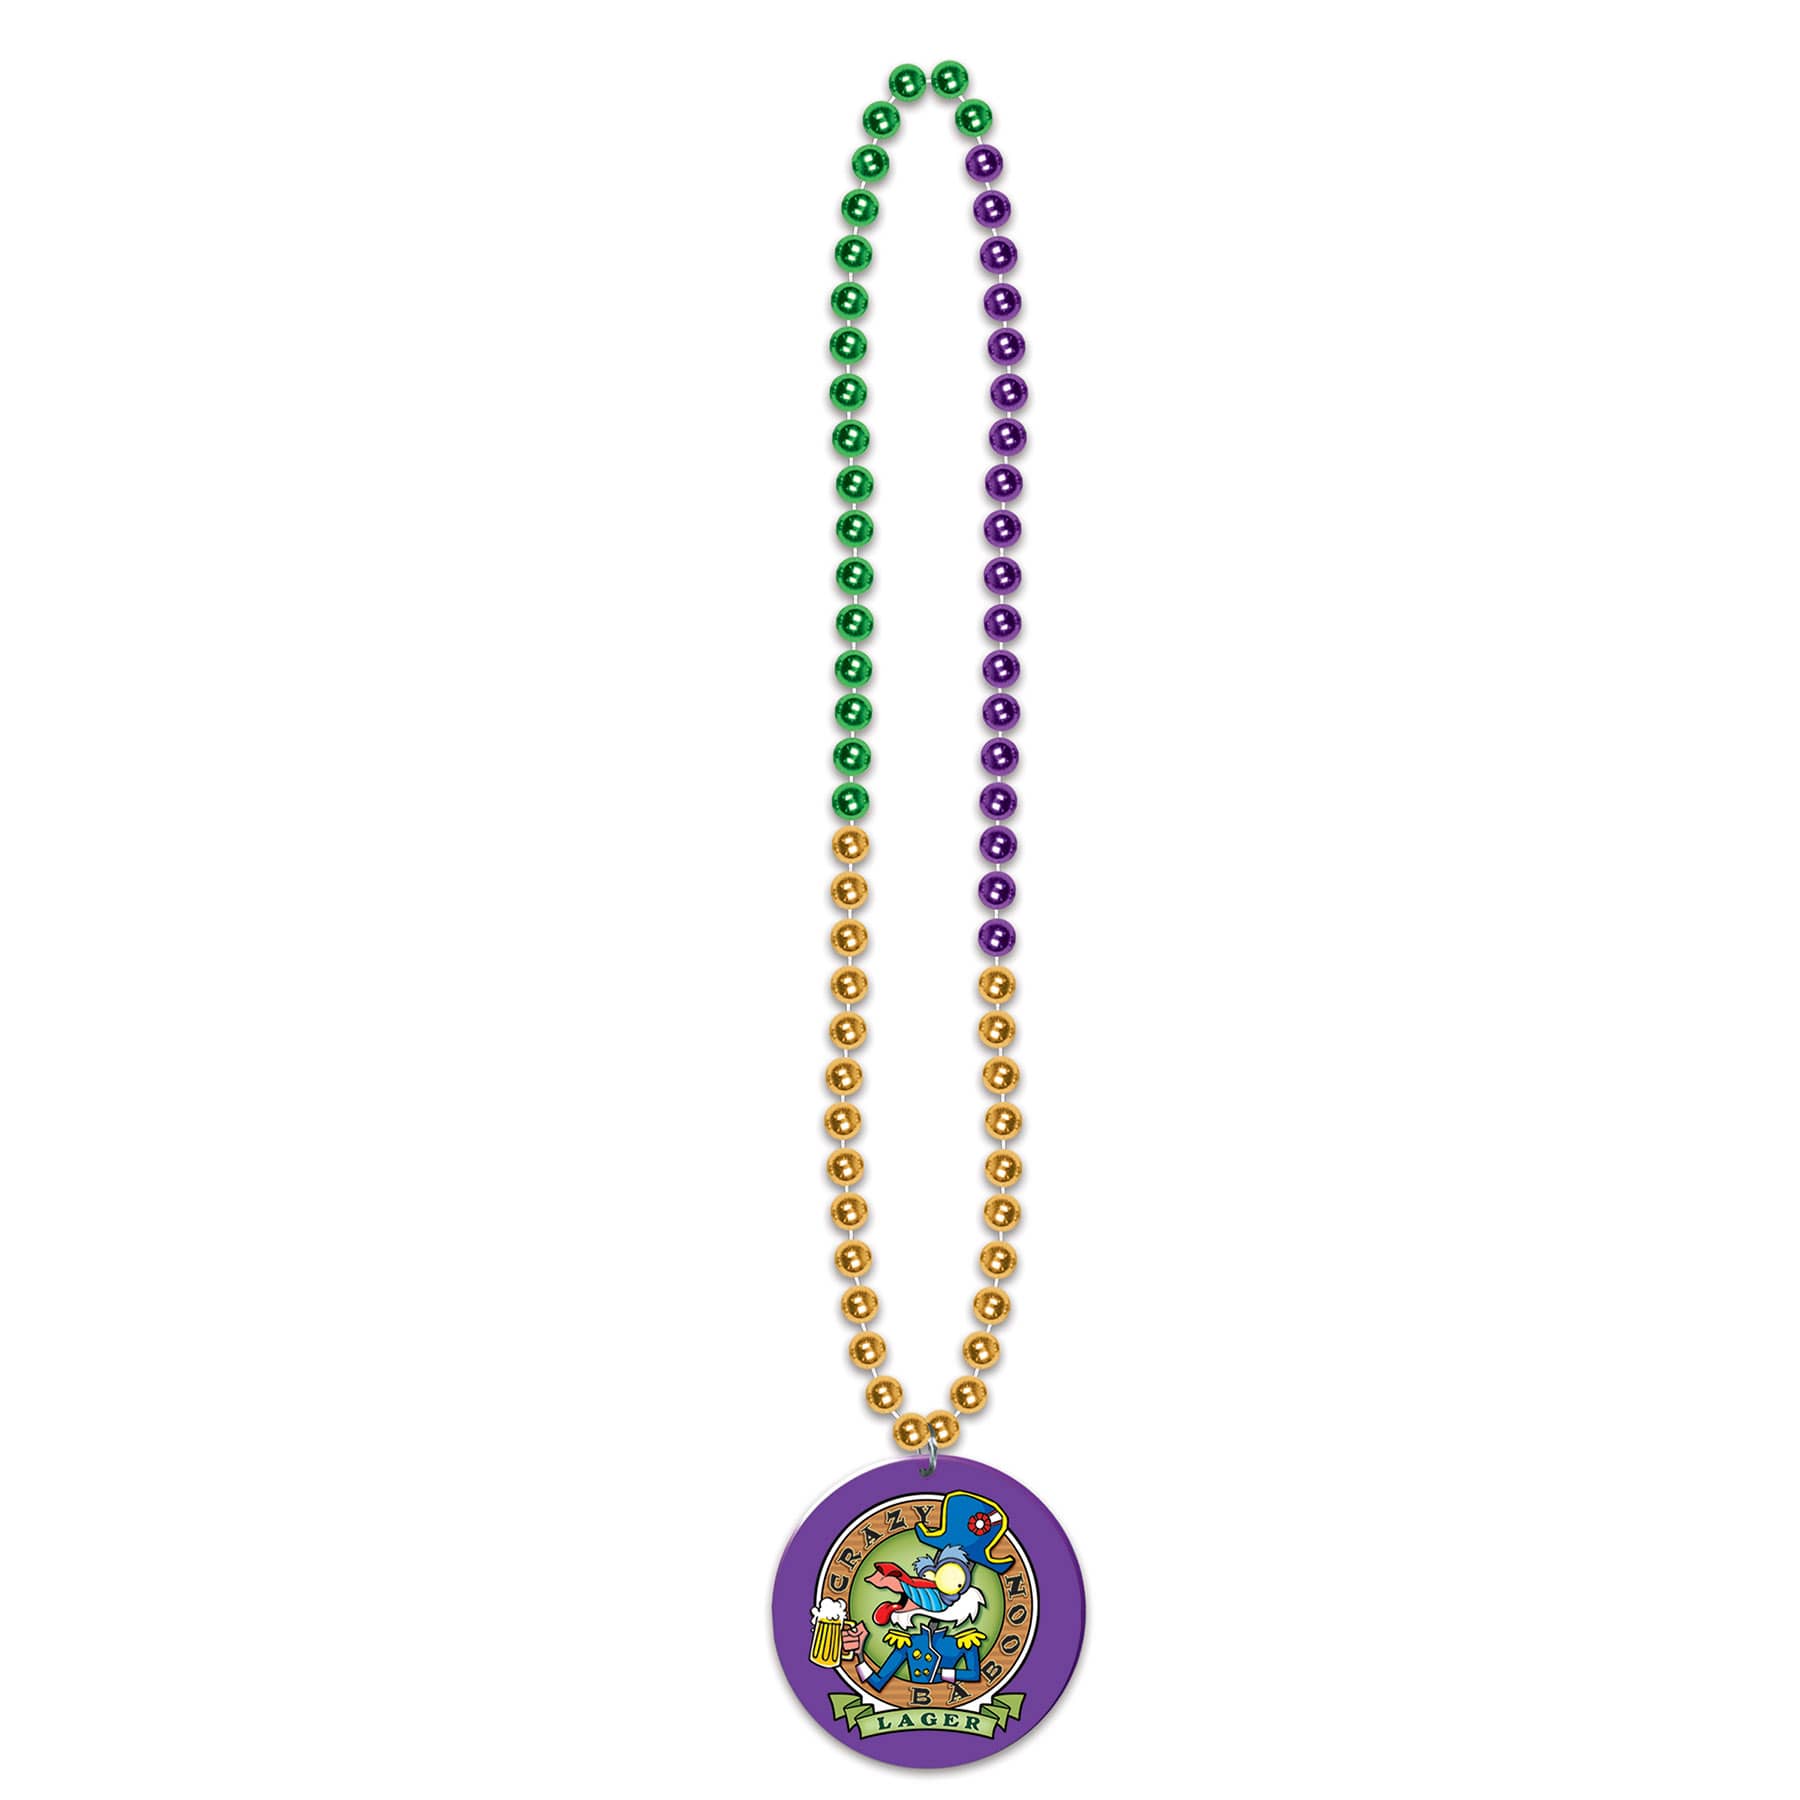 Mardi Gras Beads in Traditional Purple, Green, and Gold Colors